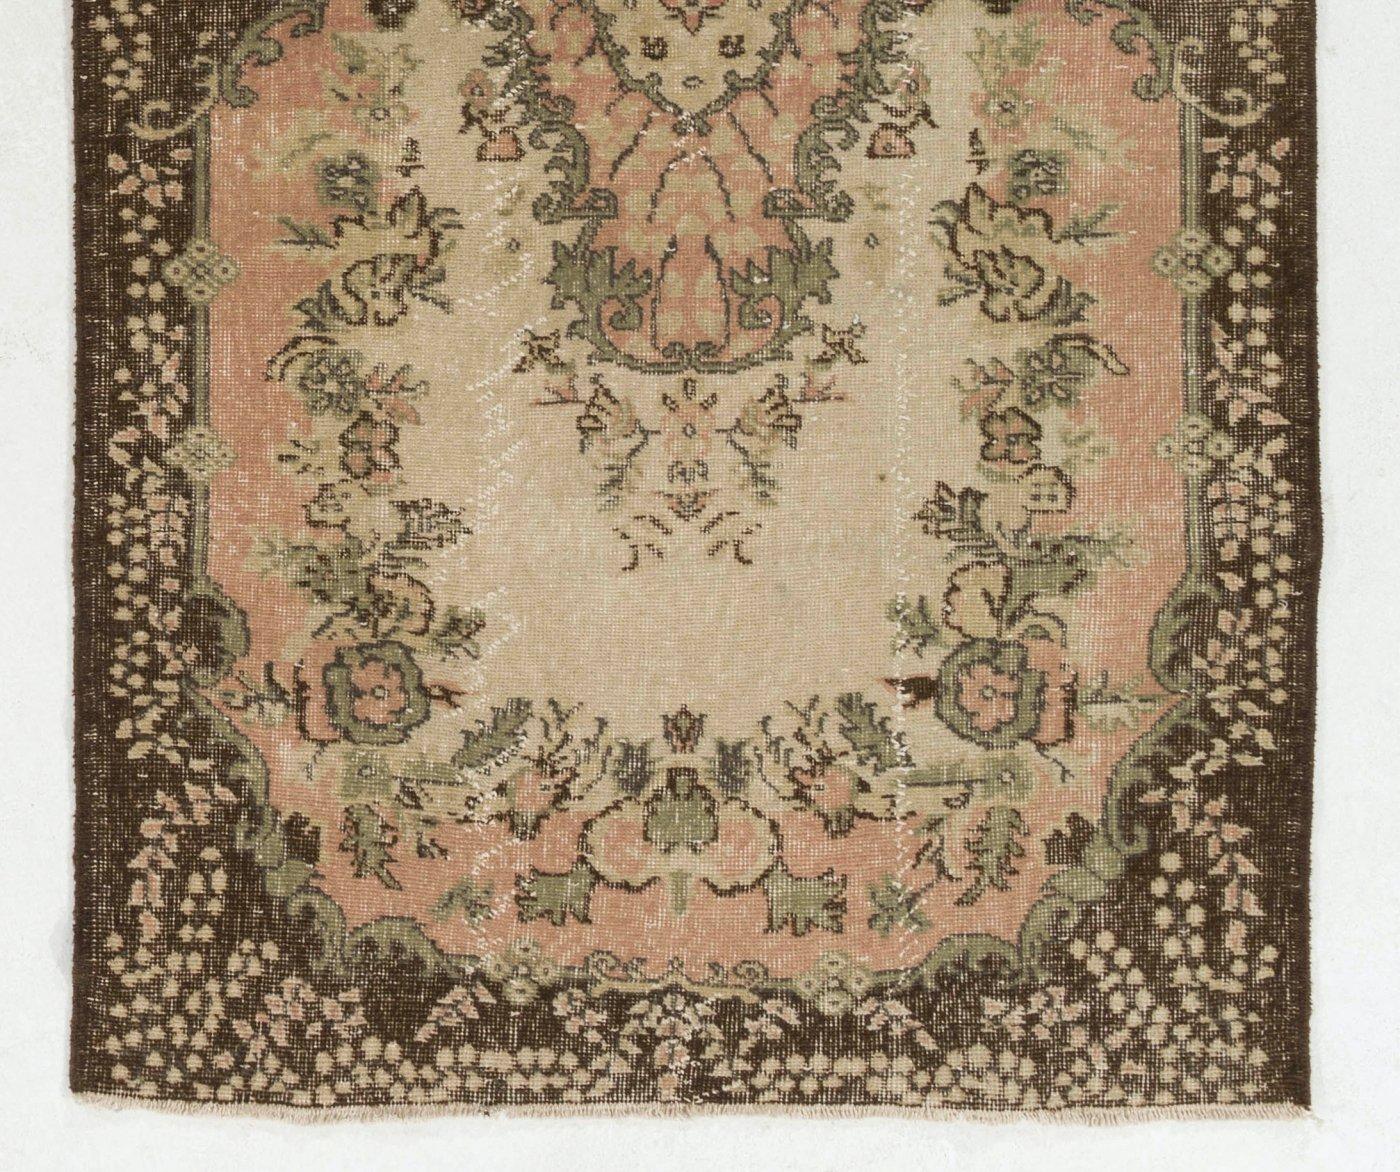 Oushak 4x7.2 Ft Vintage Hand-Knotted Turkish Rug in Beige, Green, Pink & Brown Colors For Sale